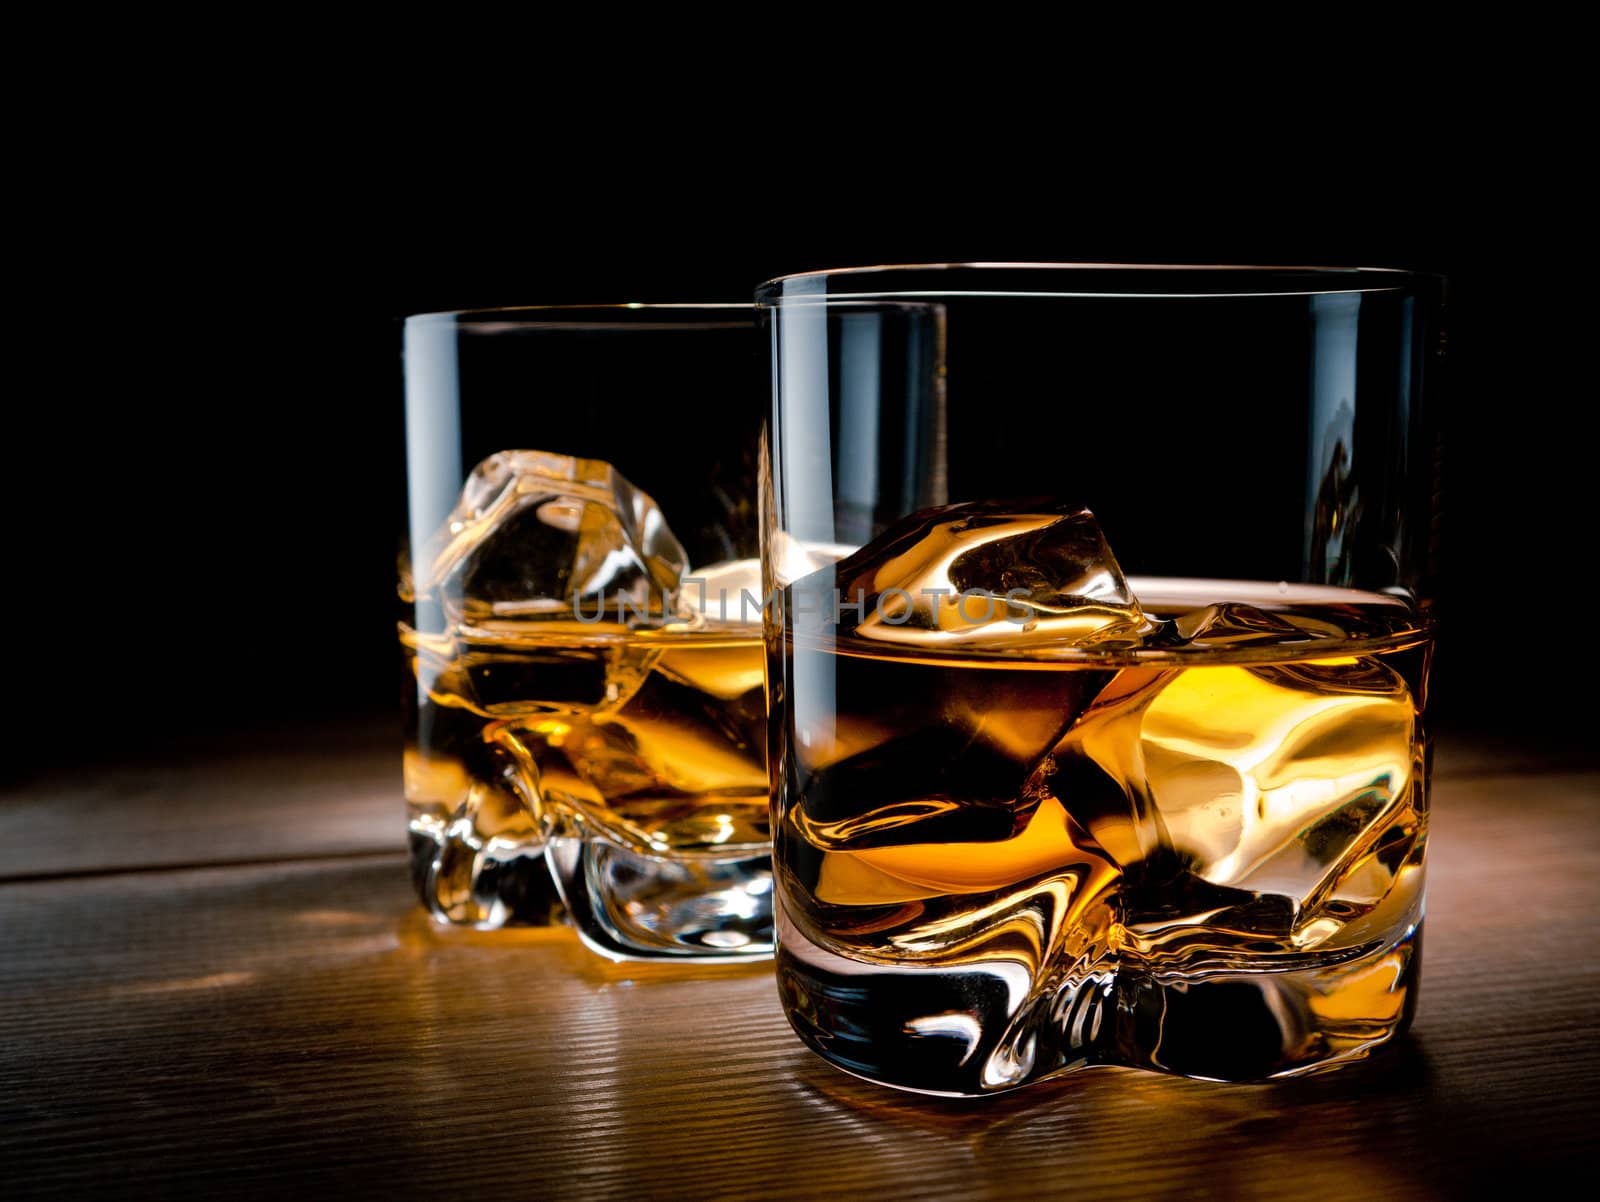 Two glasses of whisky on the rocks